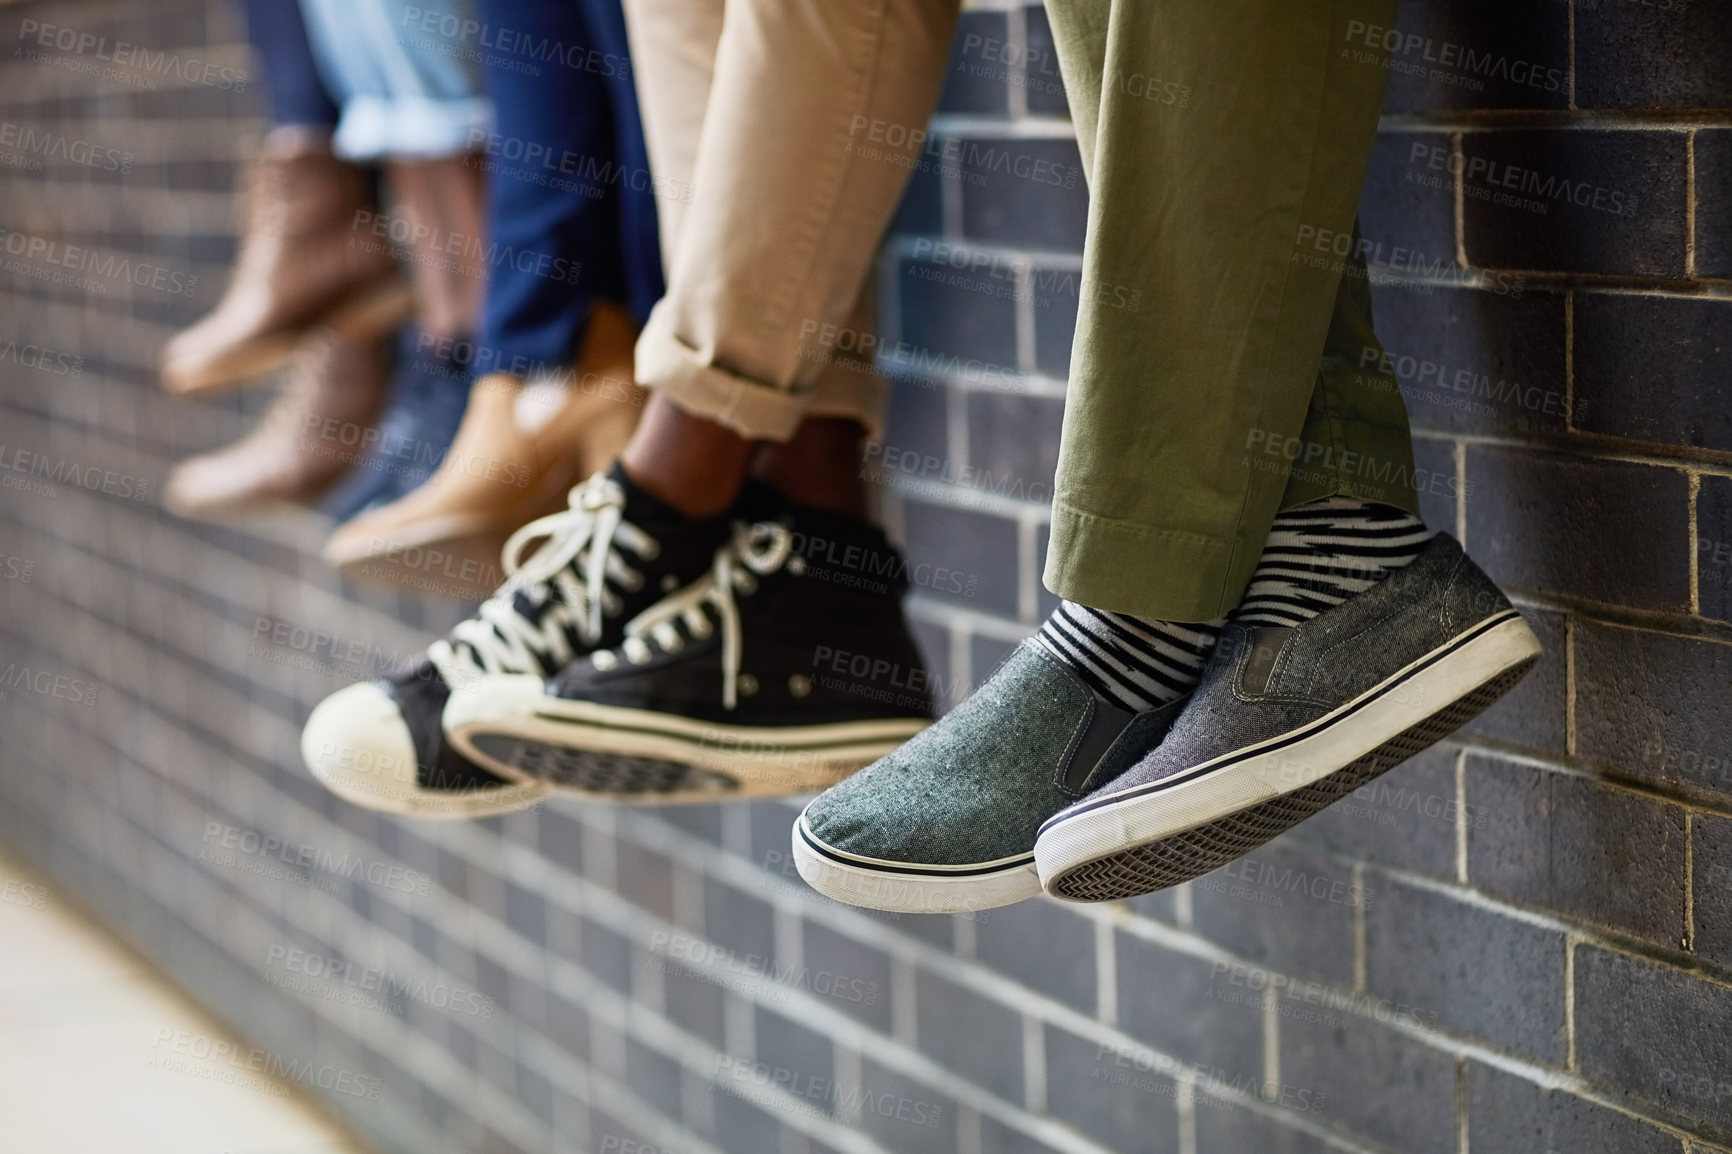 Buy stock photo Brick wall, students feet and friends outdoor on university campus together with sneakers. Relax, youth and foot at college with people legs ready for education, study and urban shoes while sitting